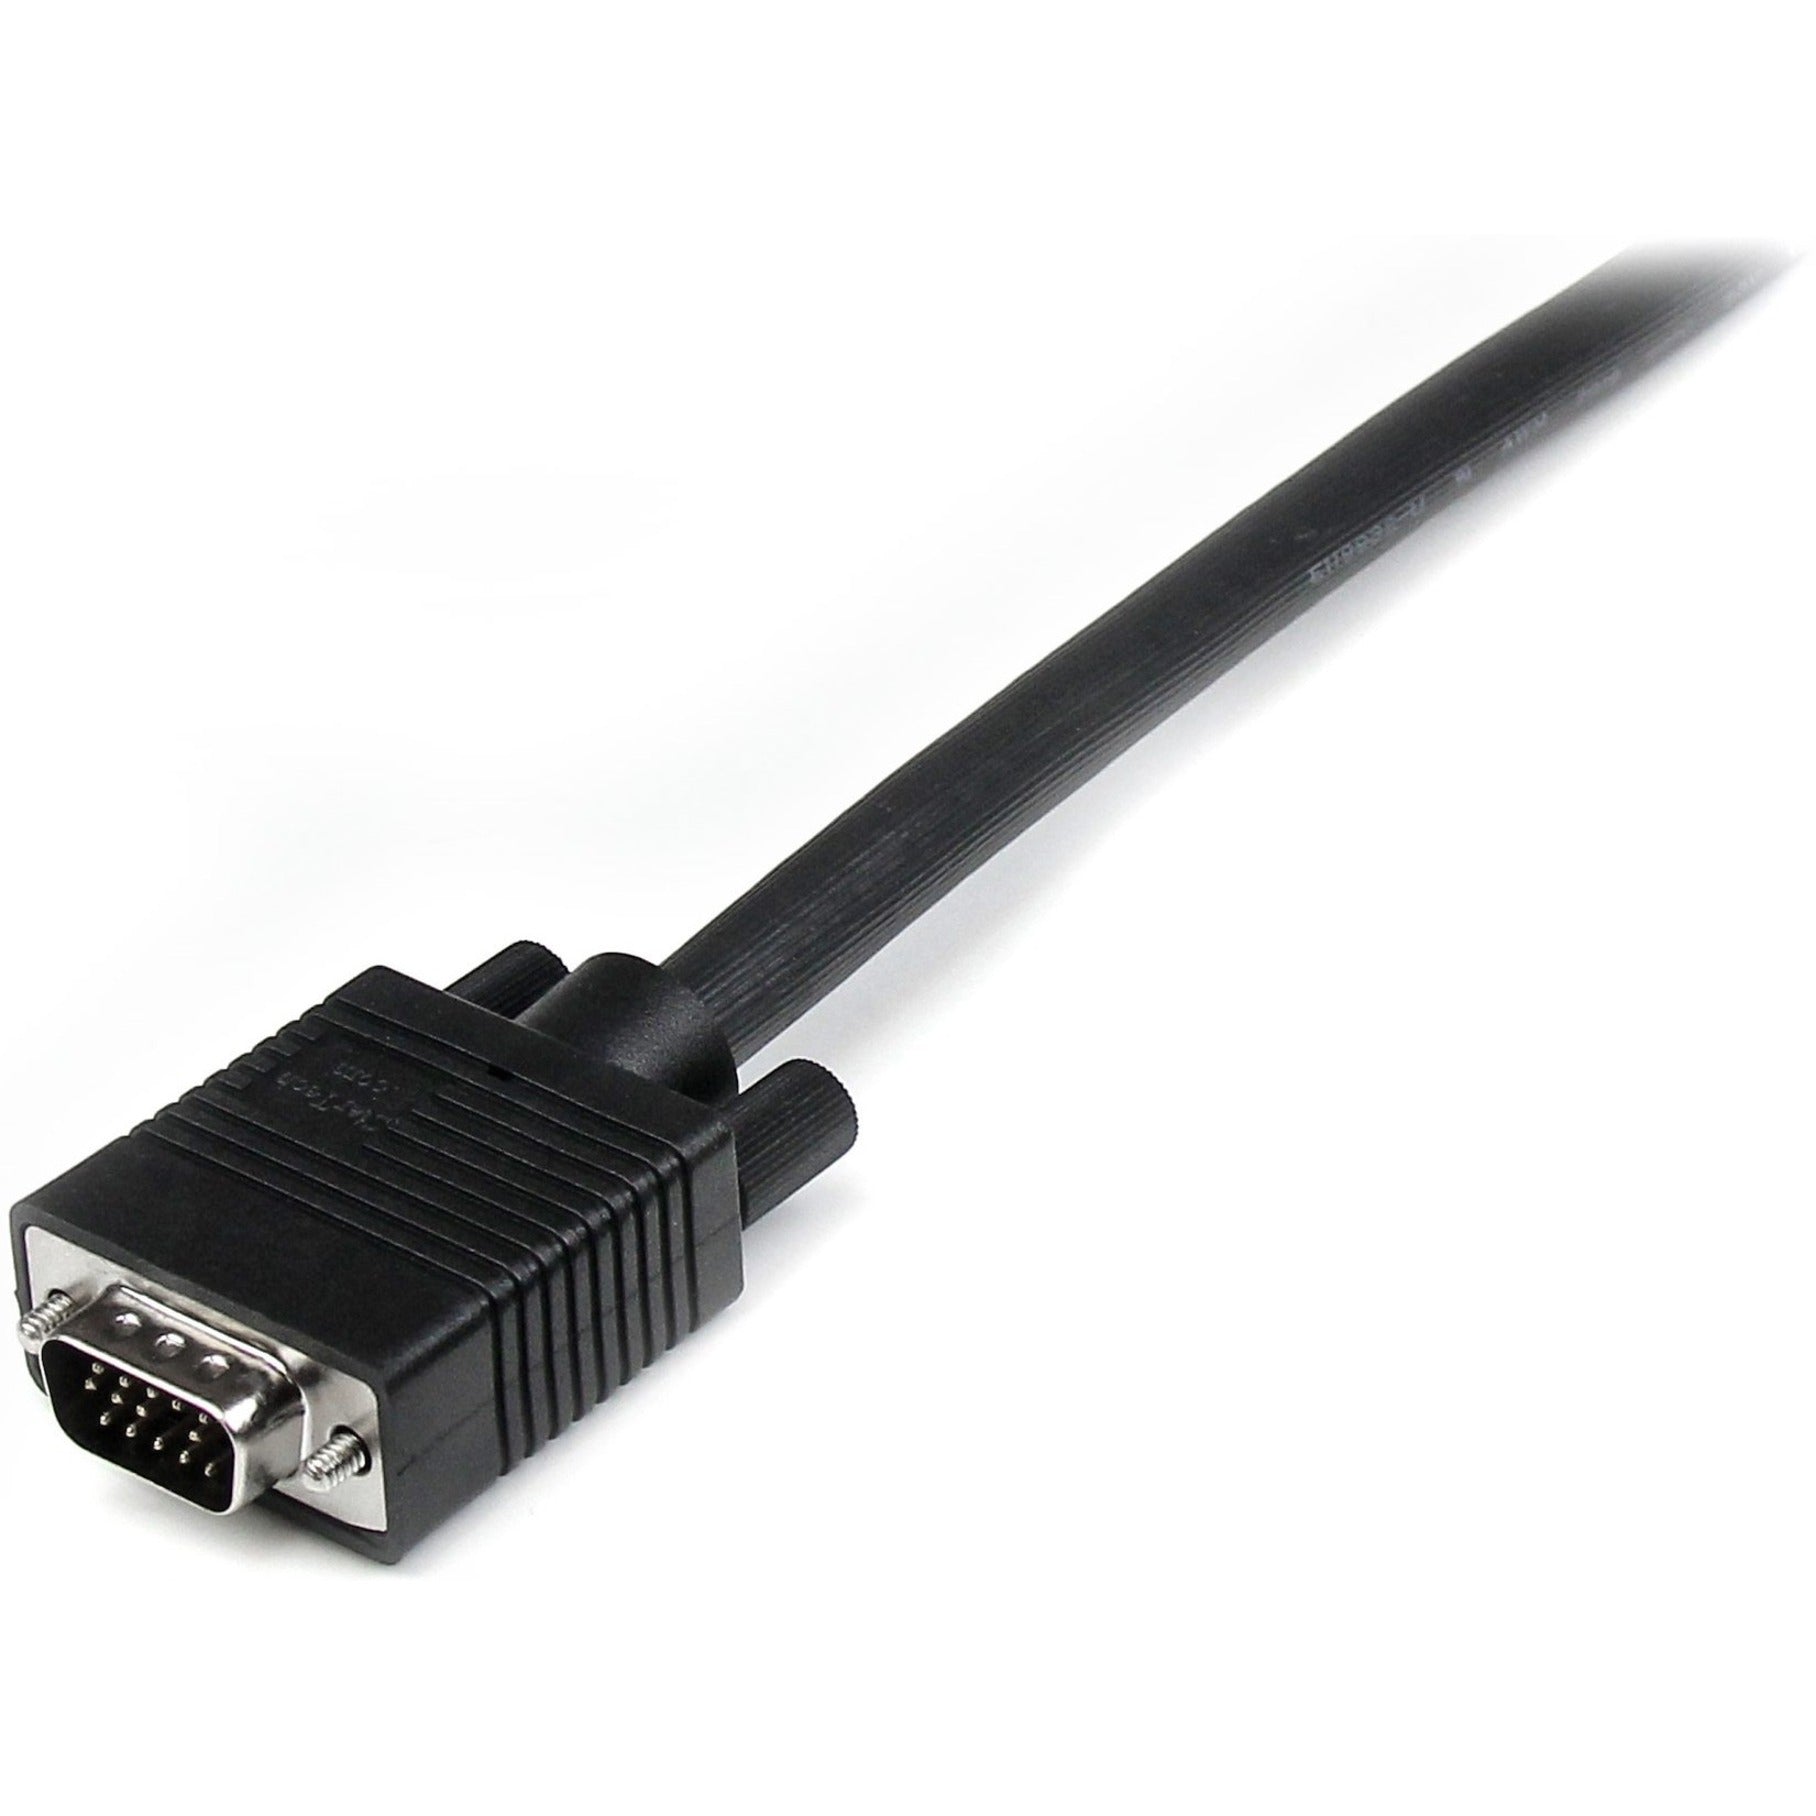 StarTech.com MXT101MMHQ3 Coax SVGA Monitor Cable, 3 ft, High-Resolution, EMI Protection